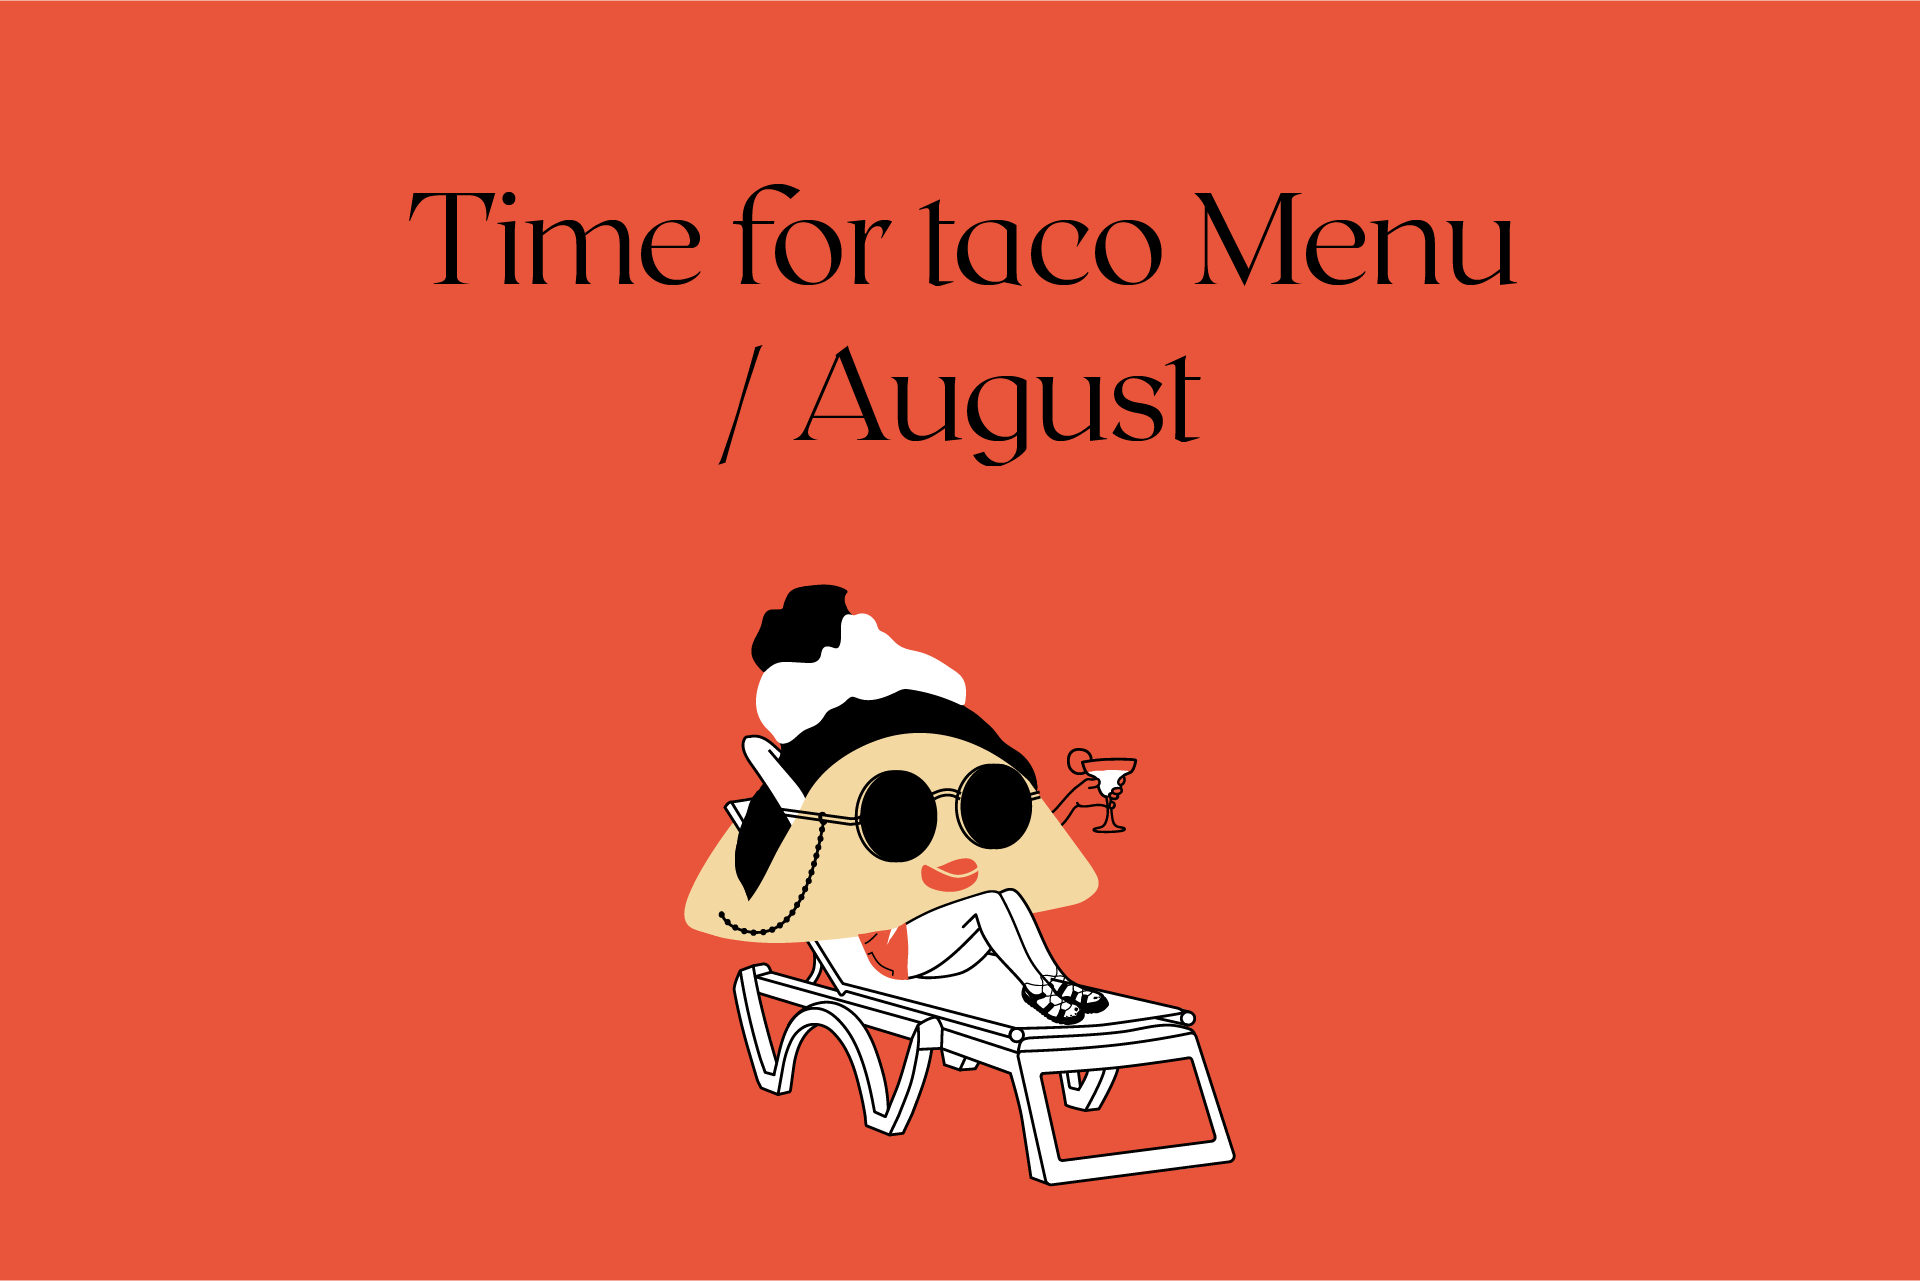 Time for taco Menu / August